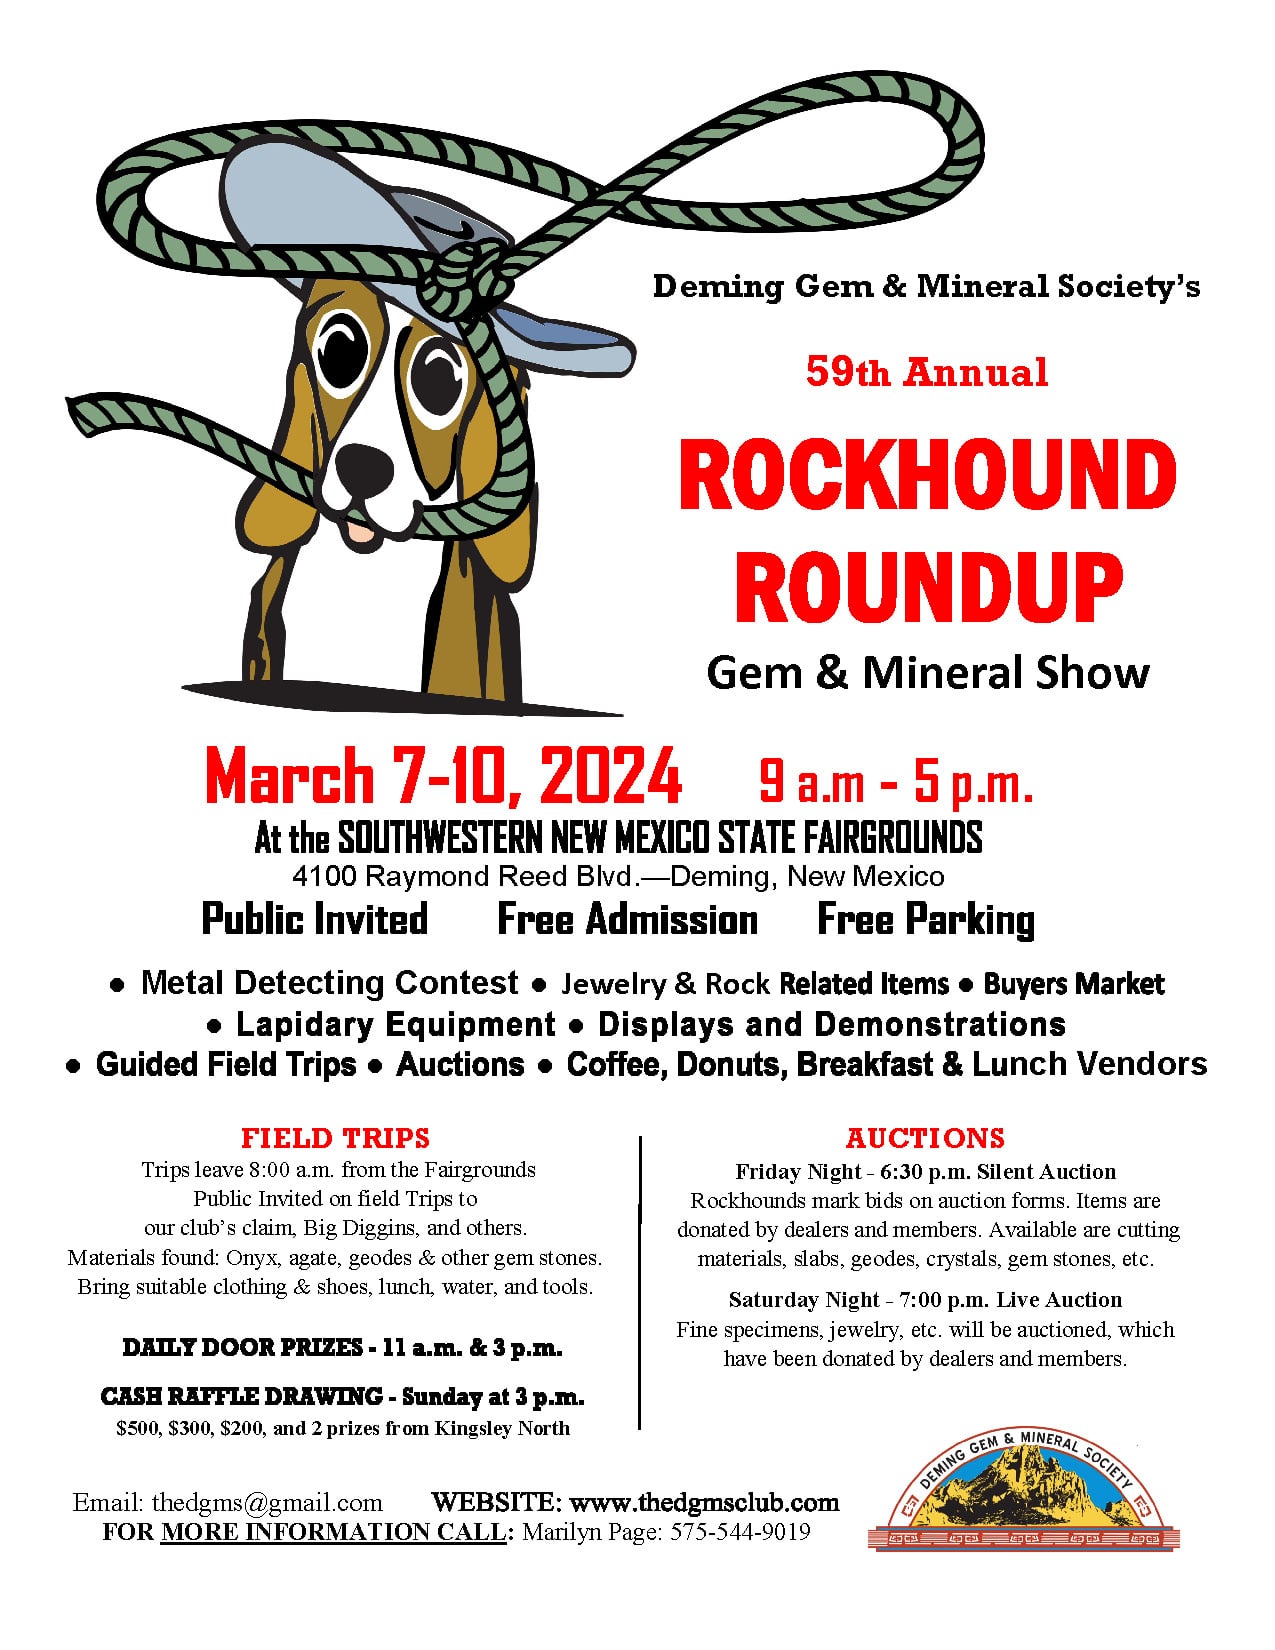 Rockhound Roundup - Deming, New Mexico